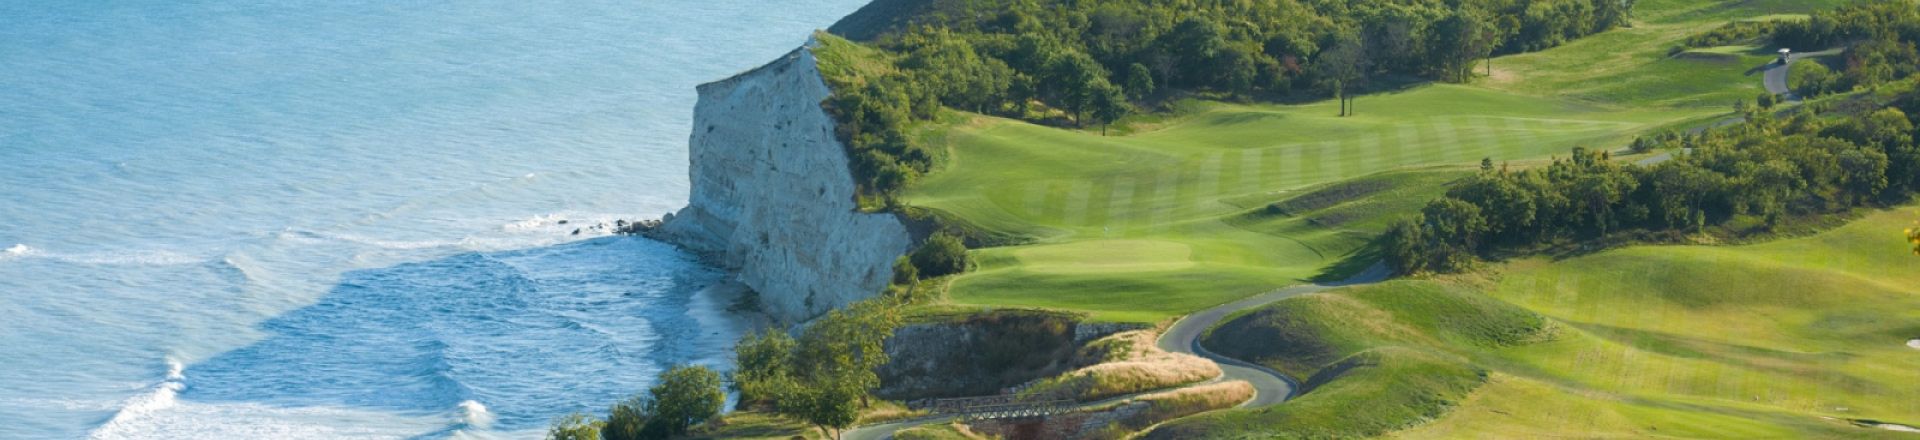 Golf Holidays in Bulgaria at Thracian Cliff, Gary Player Course